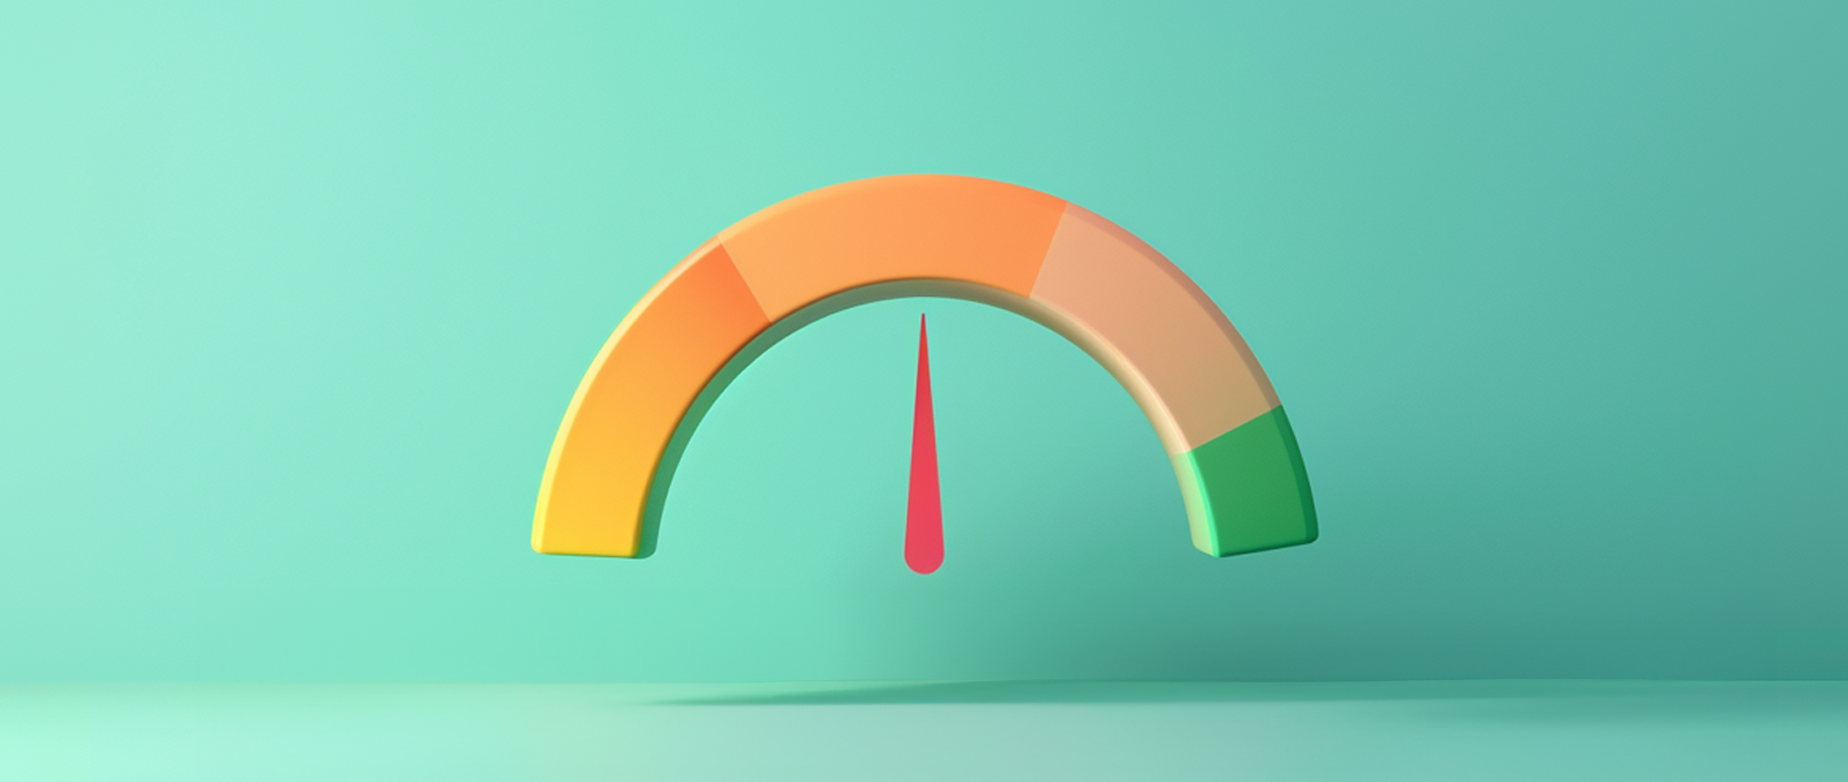 a gauge on green background representing business vs personal credit